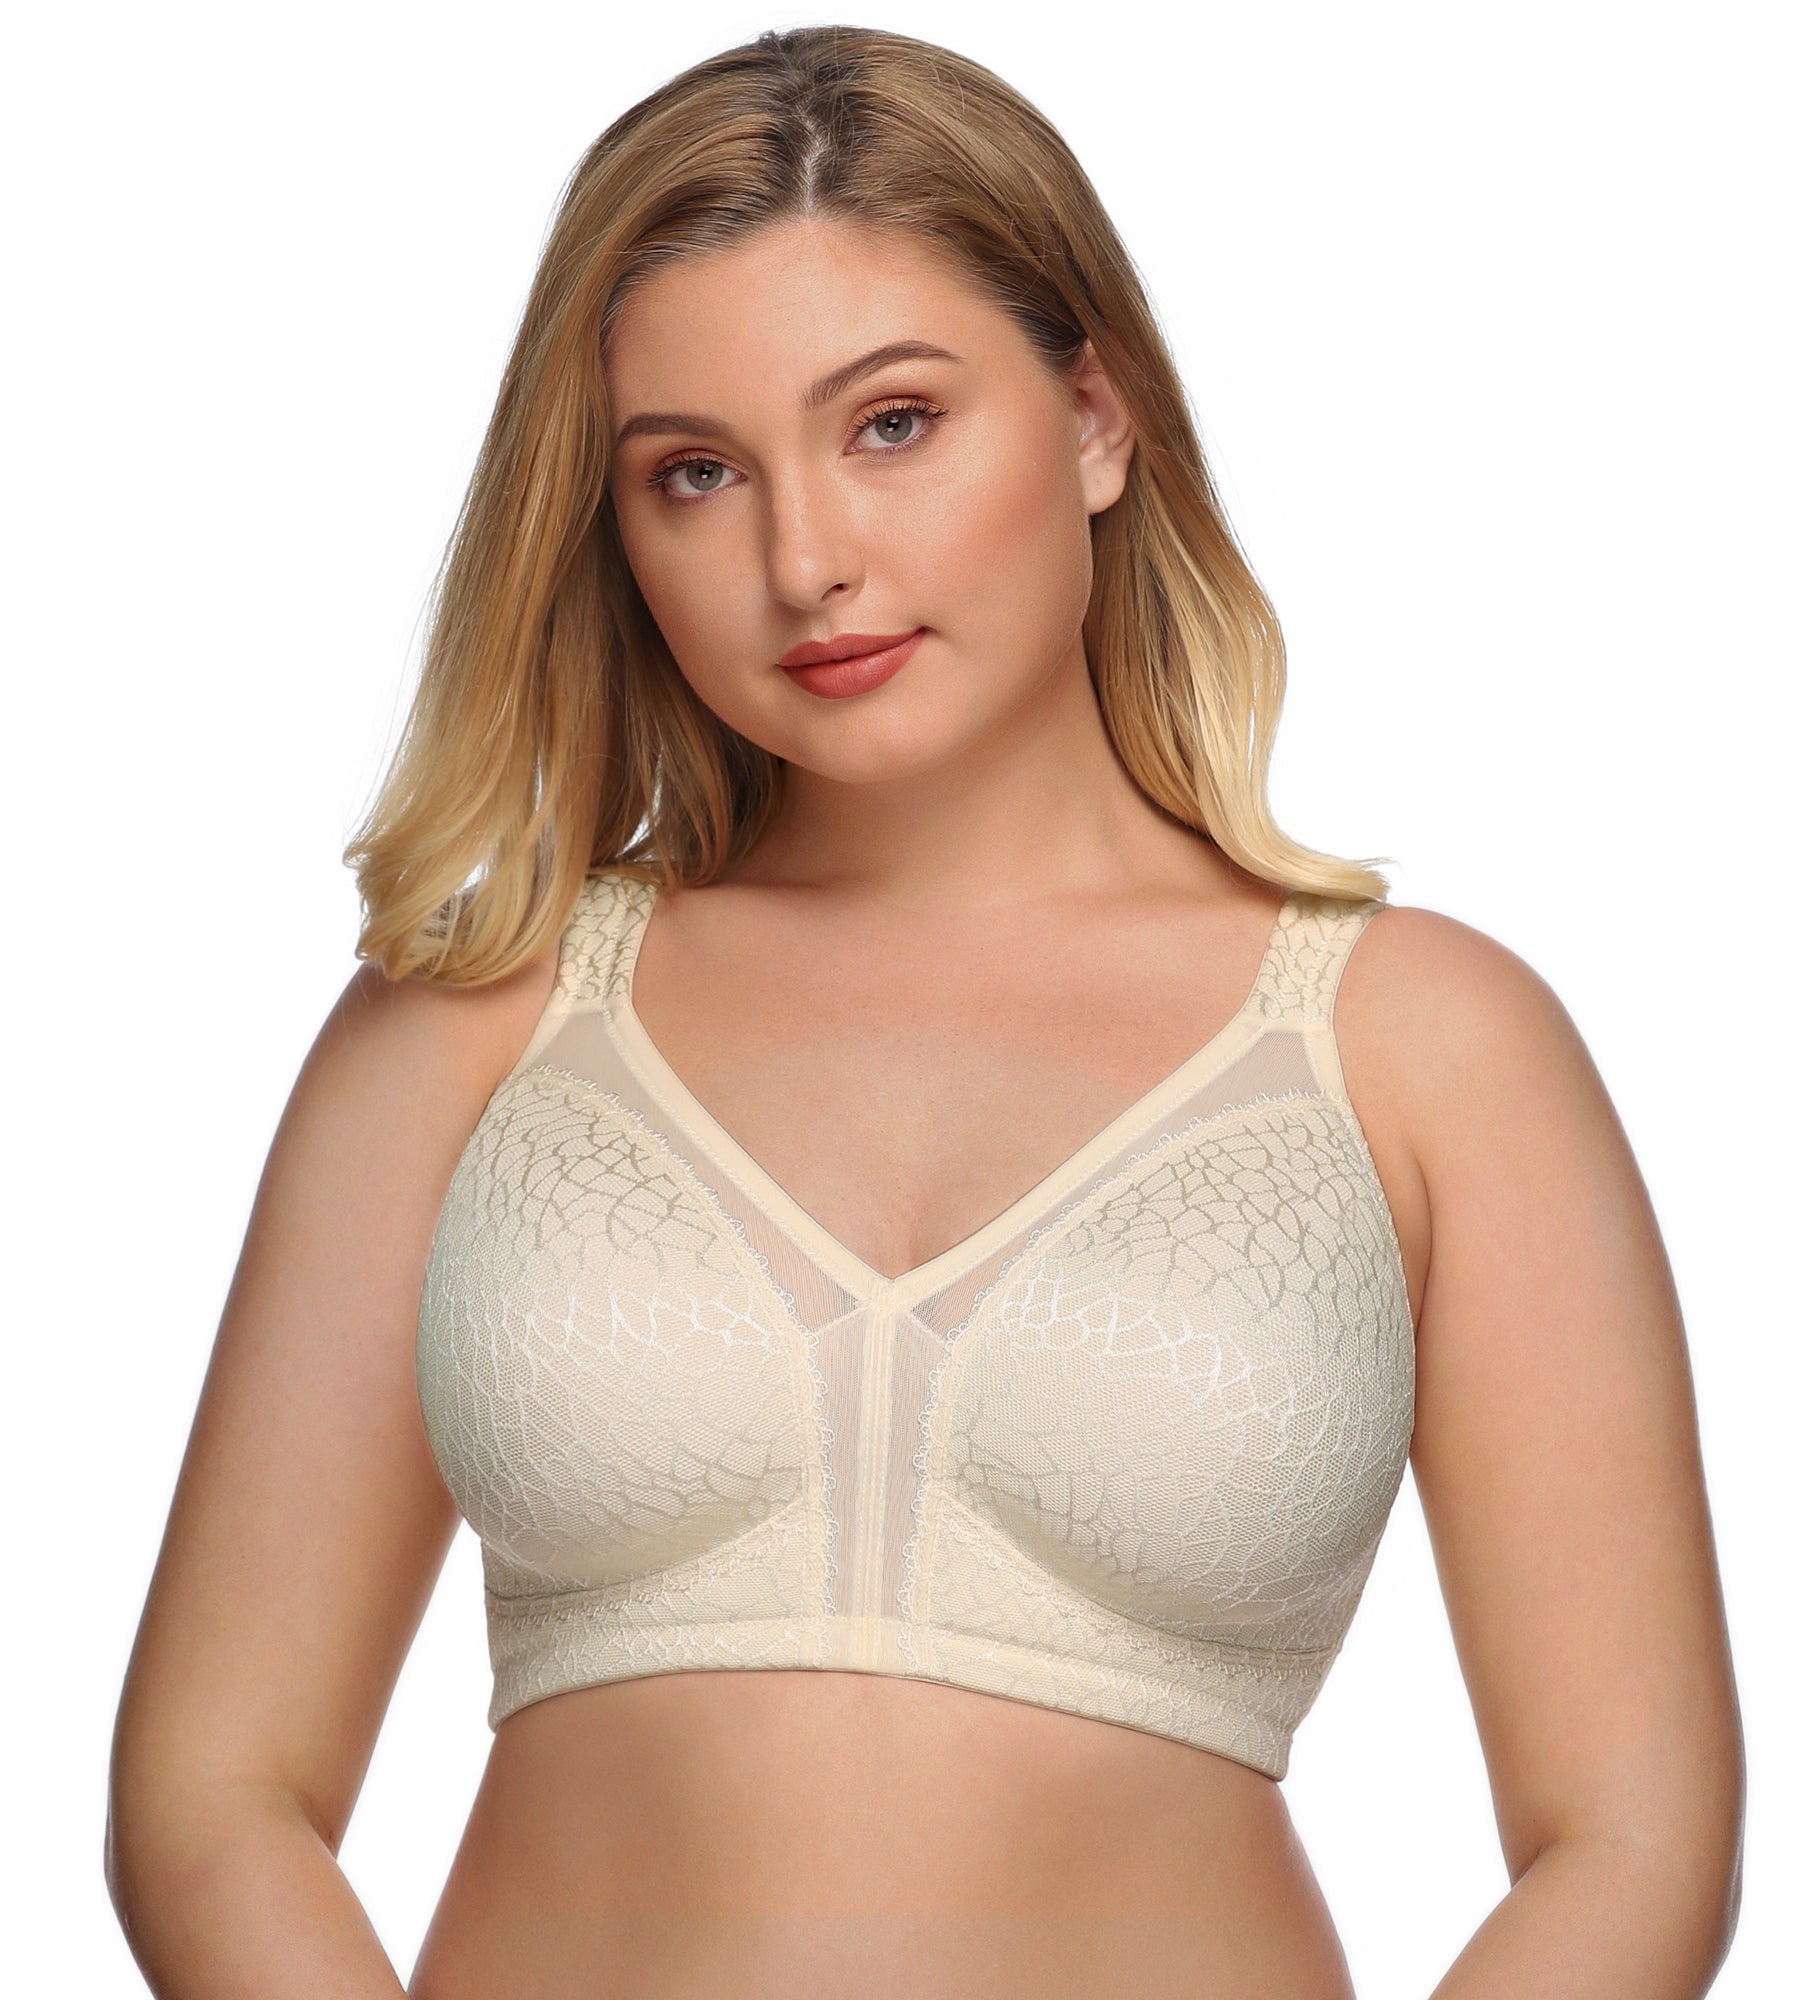 Just My Size WHITE Comfort Strap Minimizer Soft Cup Bra, US 48C